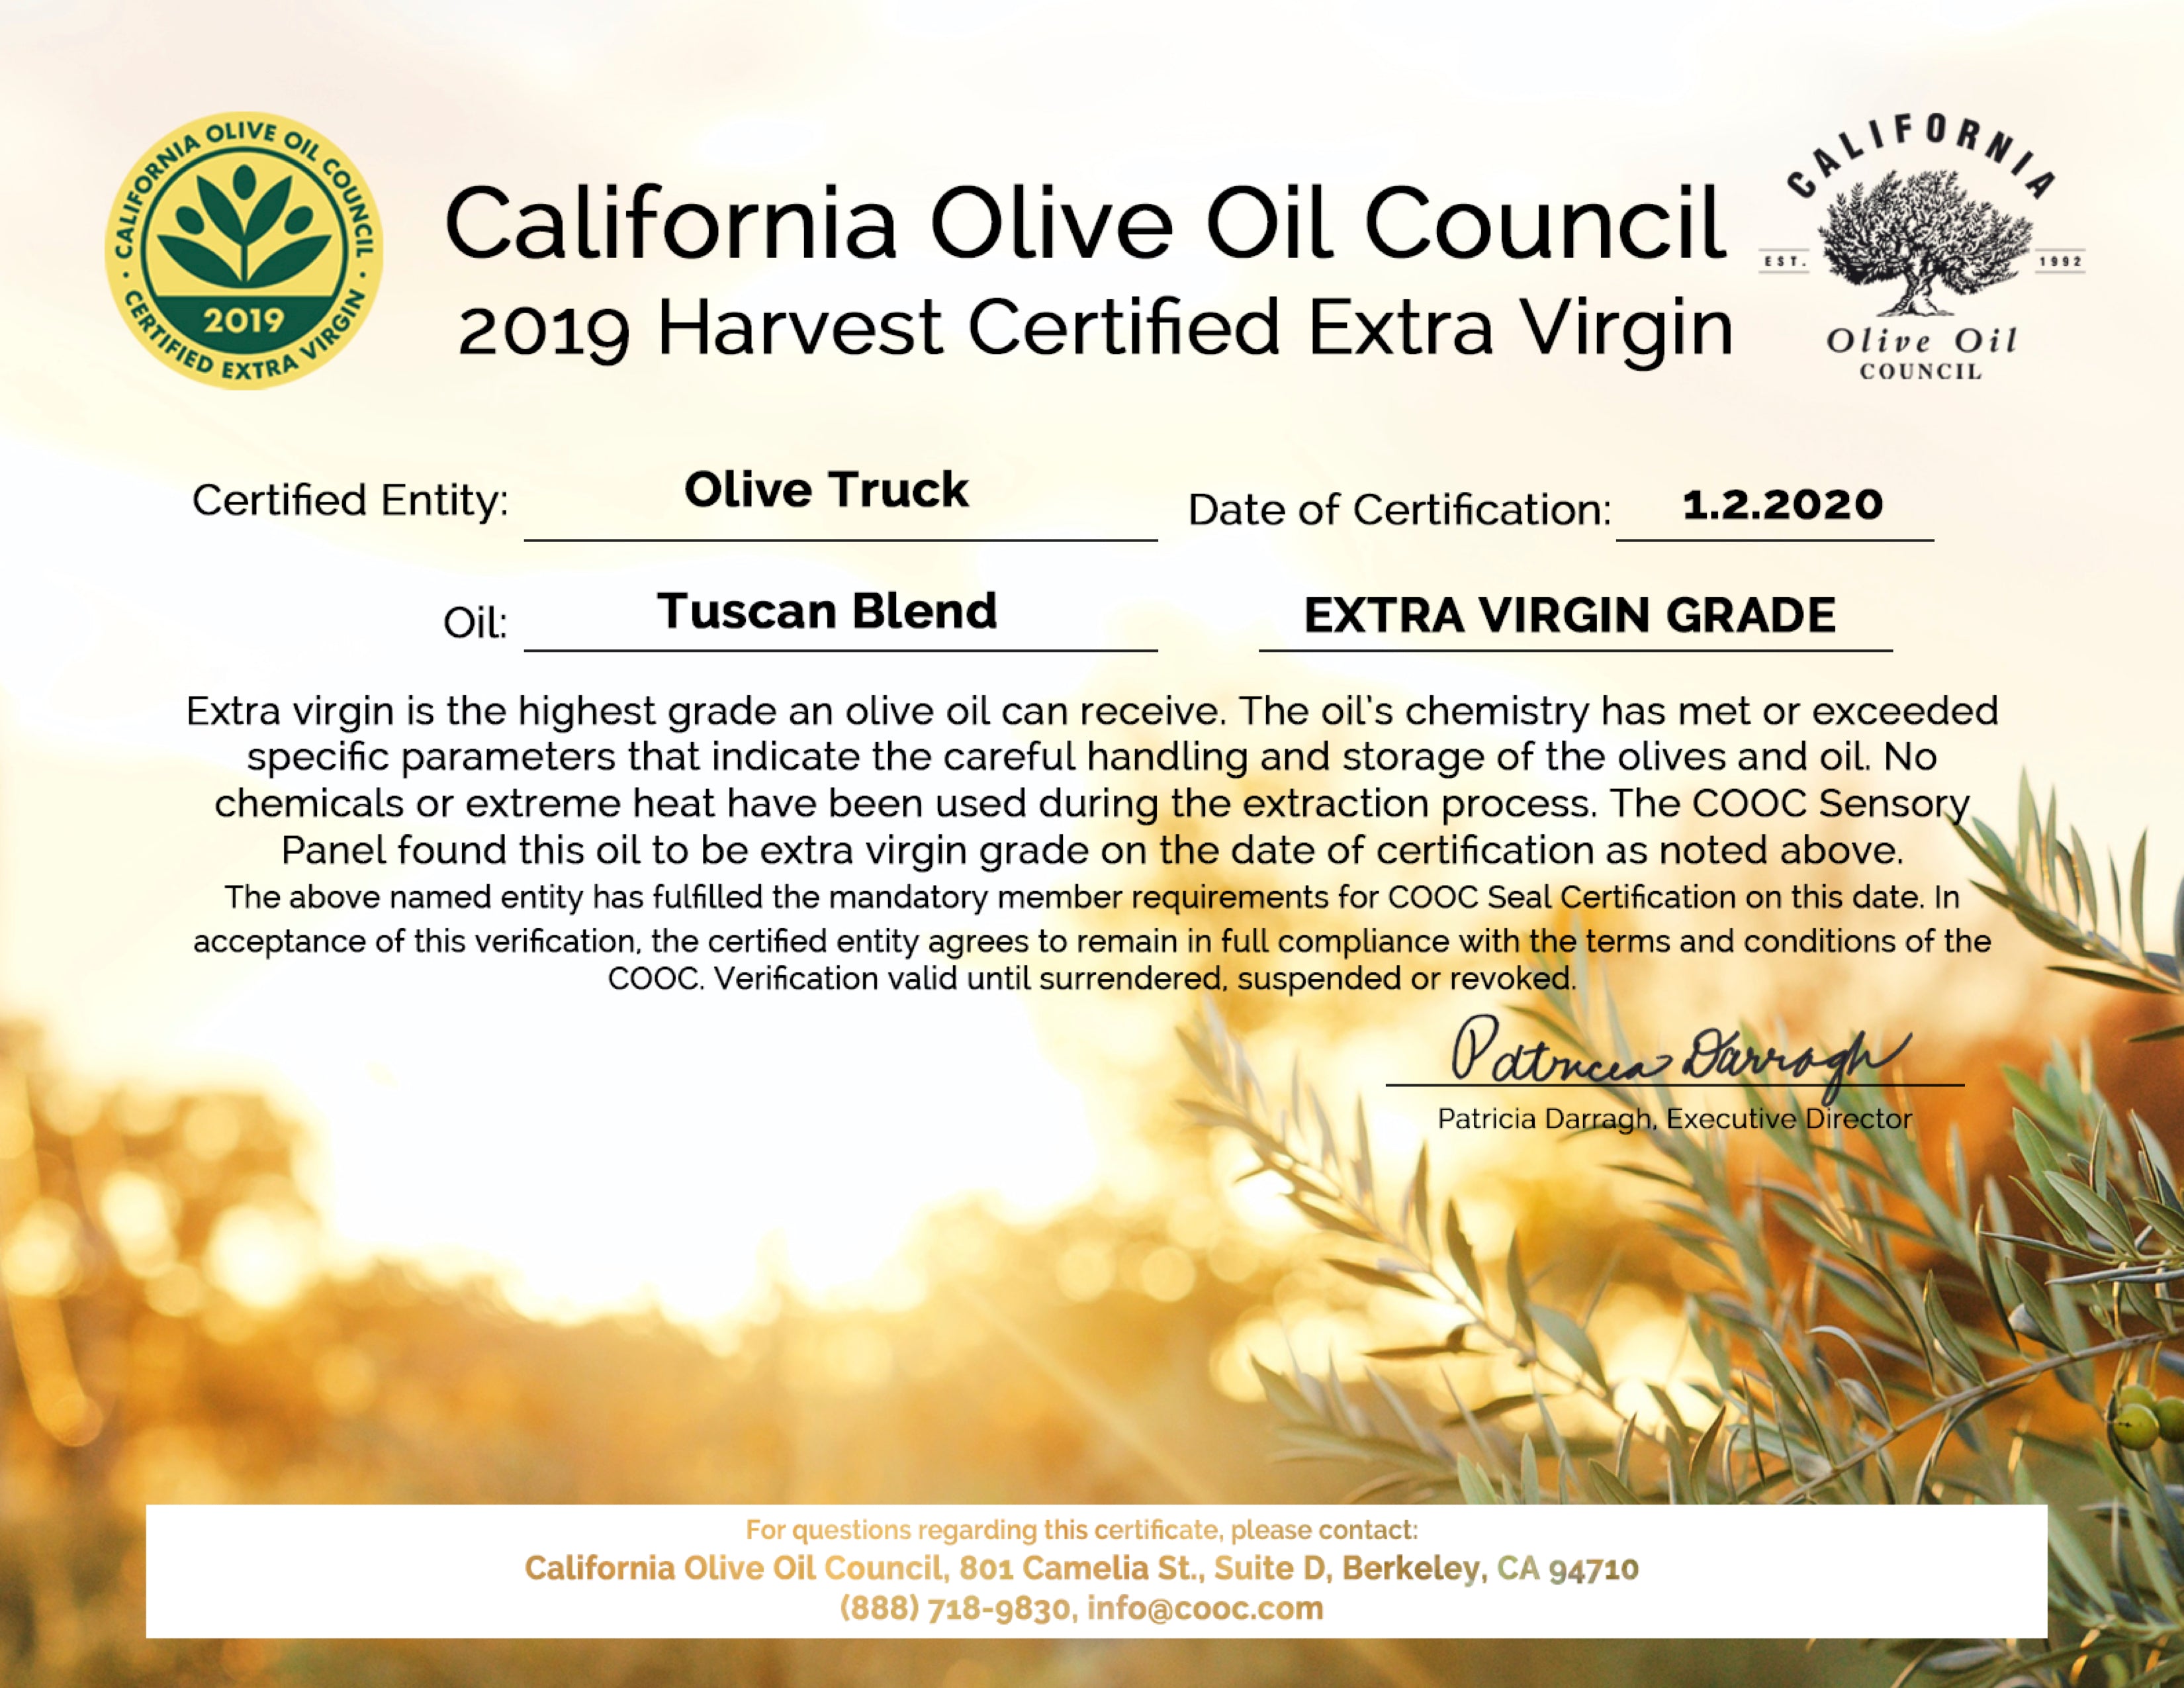 Tuscan Blend - California Olive Oil Council, 2019 Harvest Certified Extra Virgin